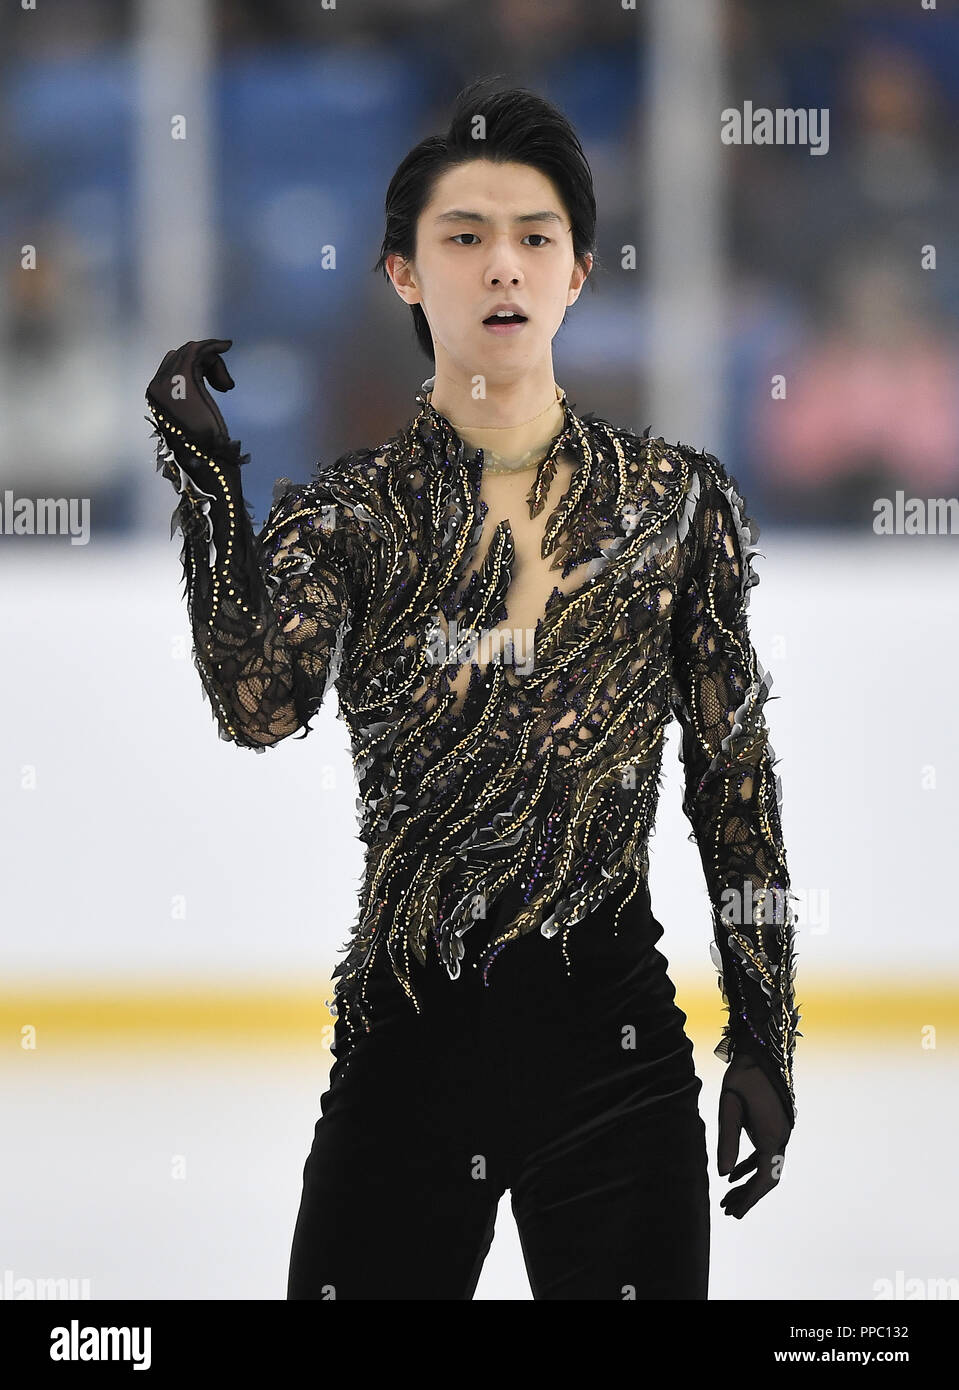 Yuzuru Hanyu of Japan performs in the Men's Free Skating during the 2018 Autumn Classic International at Sixteen Mile Sports Complex in Oakville, Ontario, Canada, September 22, 2018. (Photo by AFLO) Stock Photo